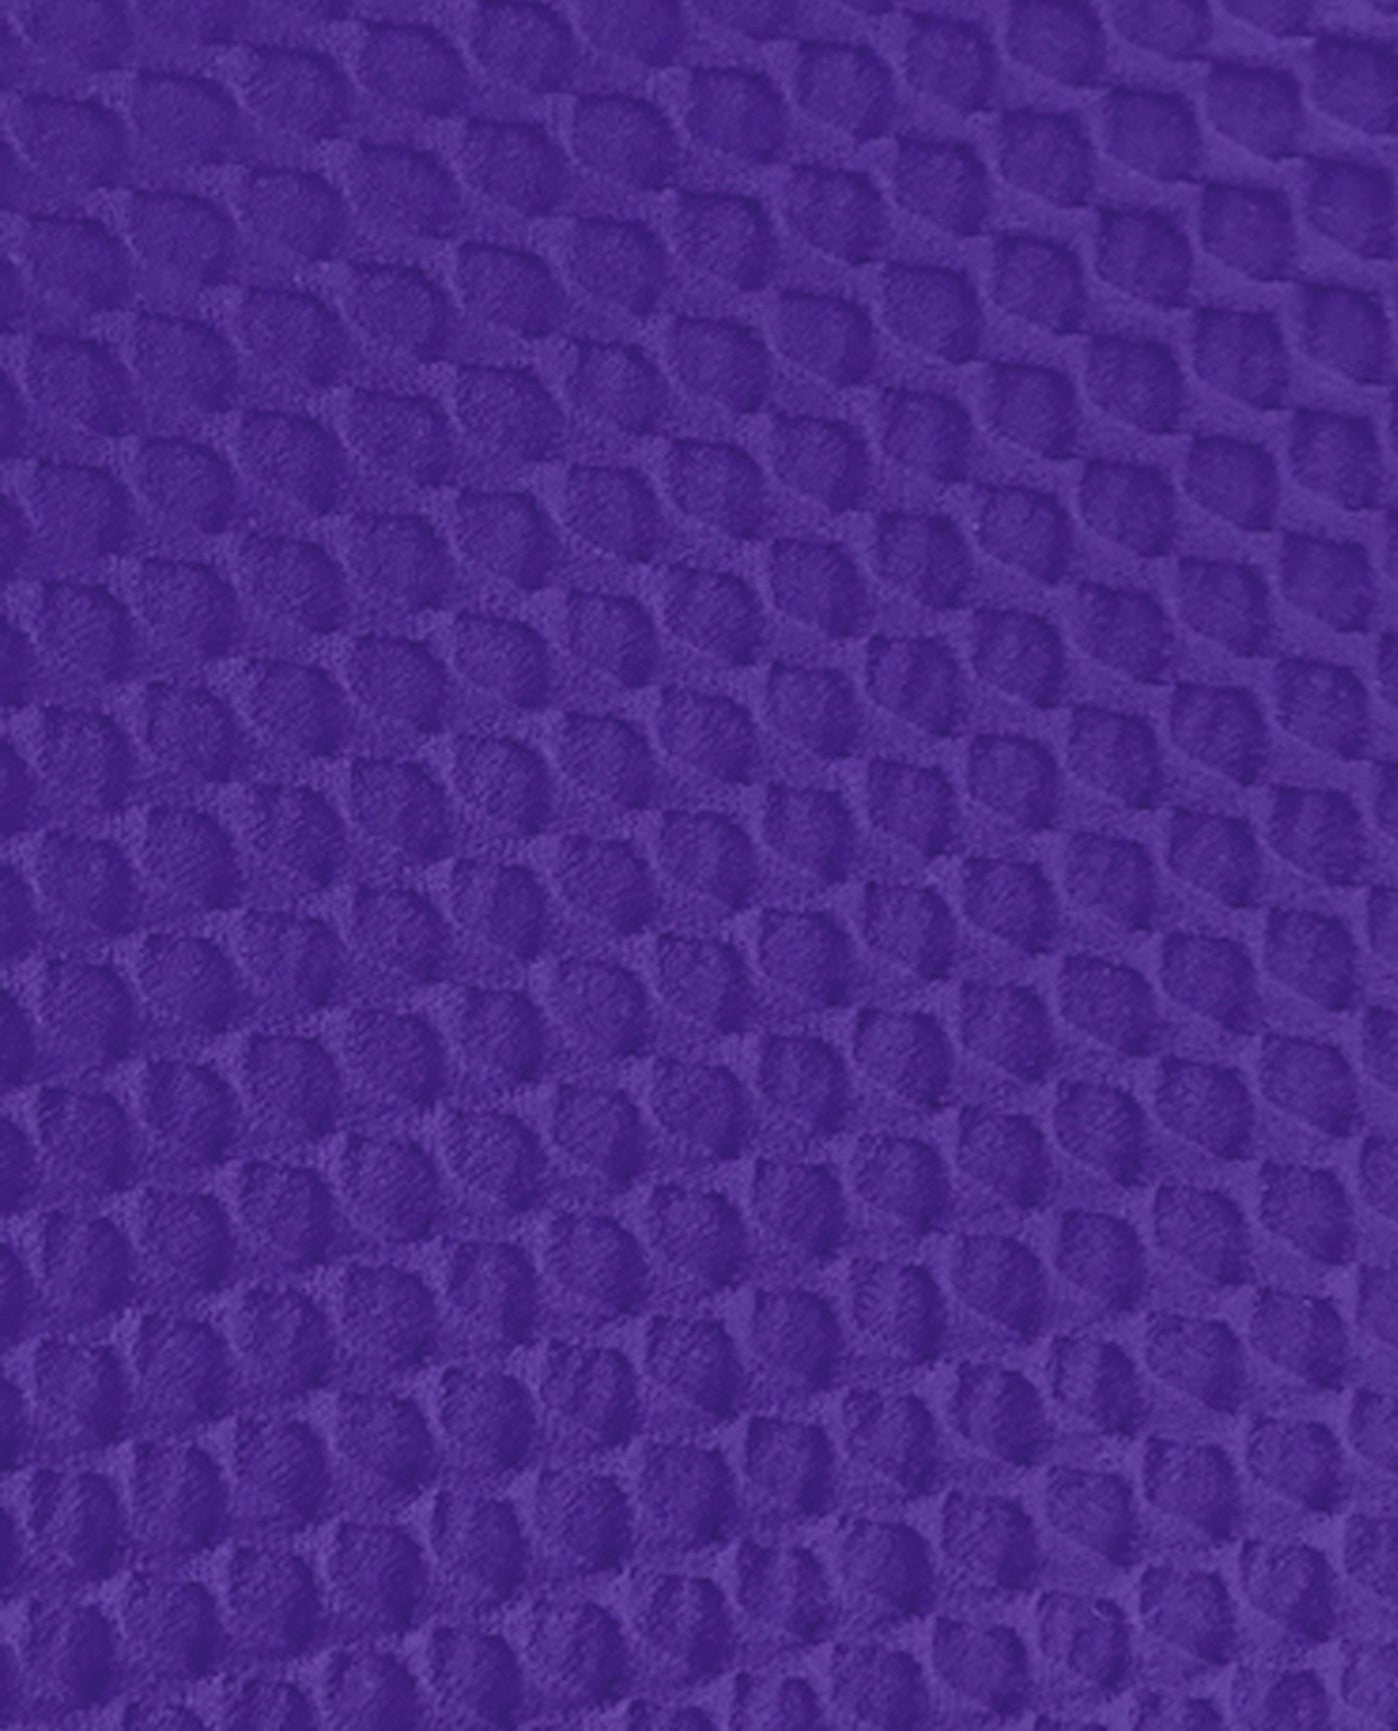 FABRIC SWATCH VIEW OF CHLORINE RESISTANT AQUAMORE SOLID TEXTURED HIGH NECK LONG TORSO ONE PIECE SWIMSUIT | 510 AQT TEXTURED PURPLE